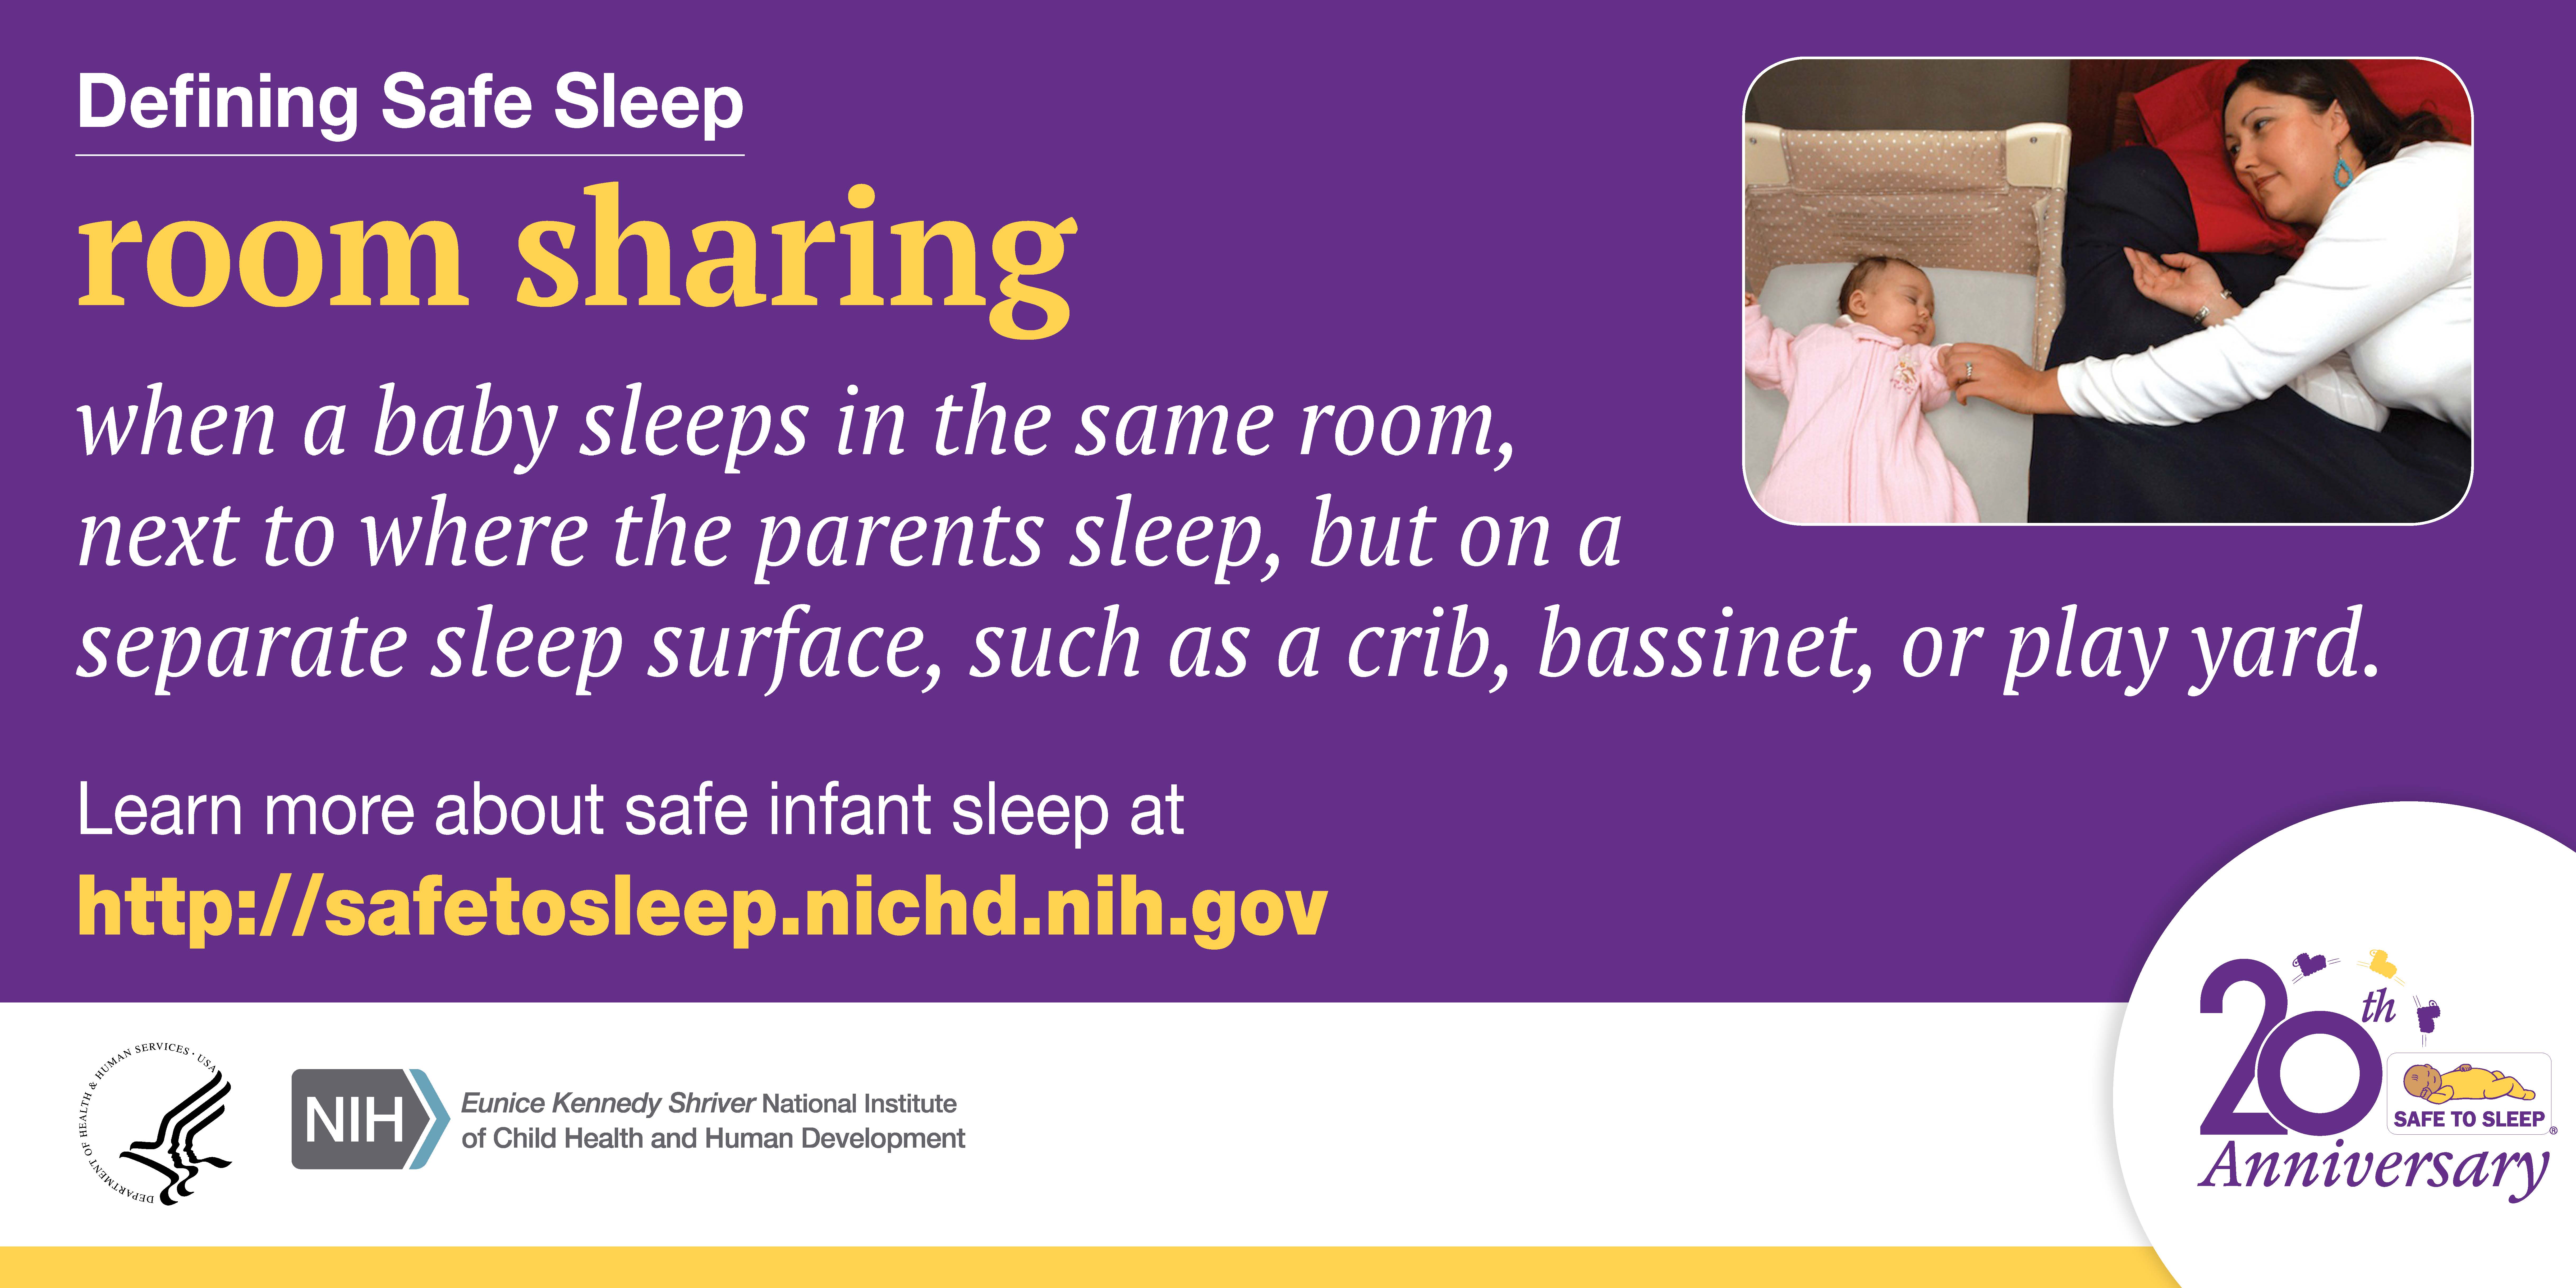 Defining Safe Sleep—Room sharing: When a baby sleeps in the same room, next to where the parents sleep, but on a separate sleep surface, such as a crib, bassinet, or play yard.